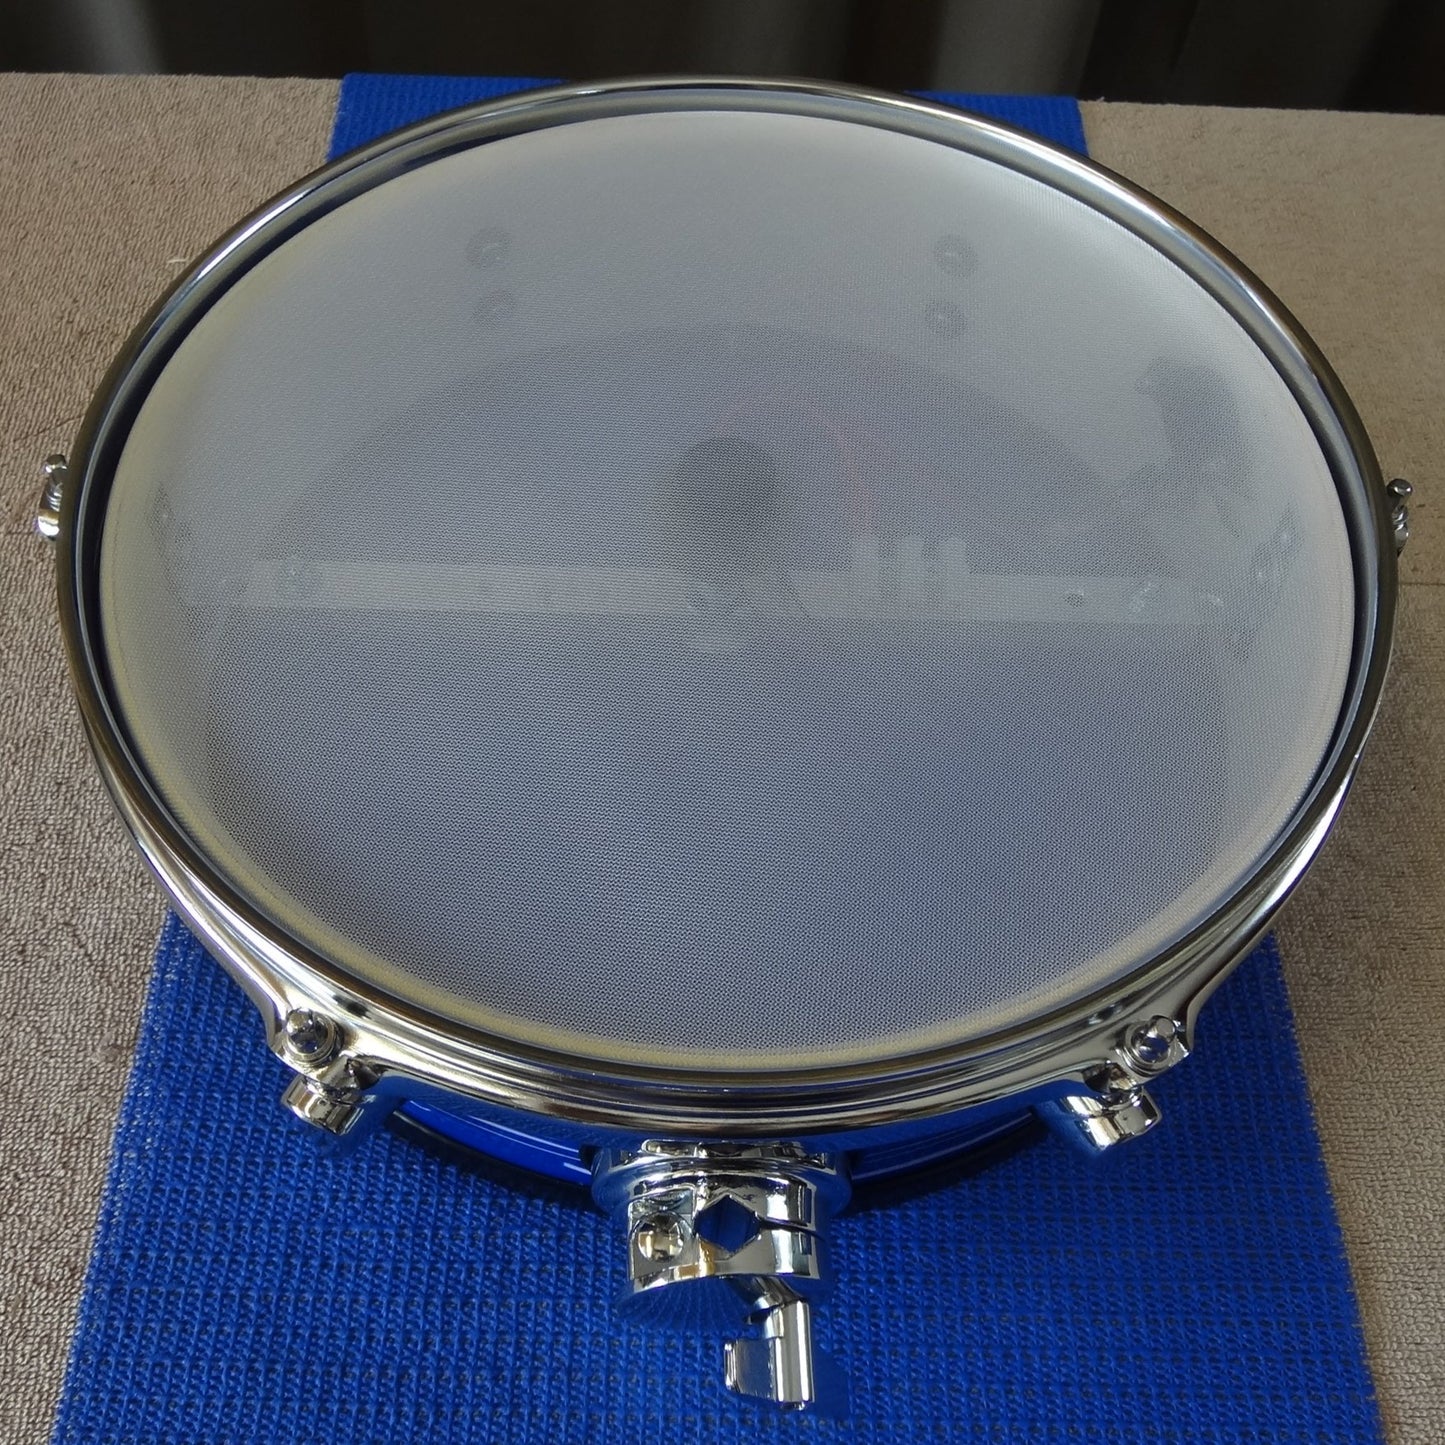 New 12 Inch Custom Electronic Snare Drum - Blue/White